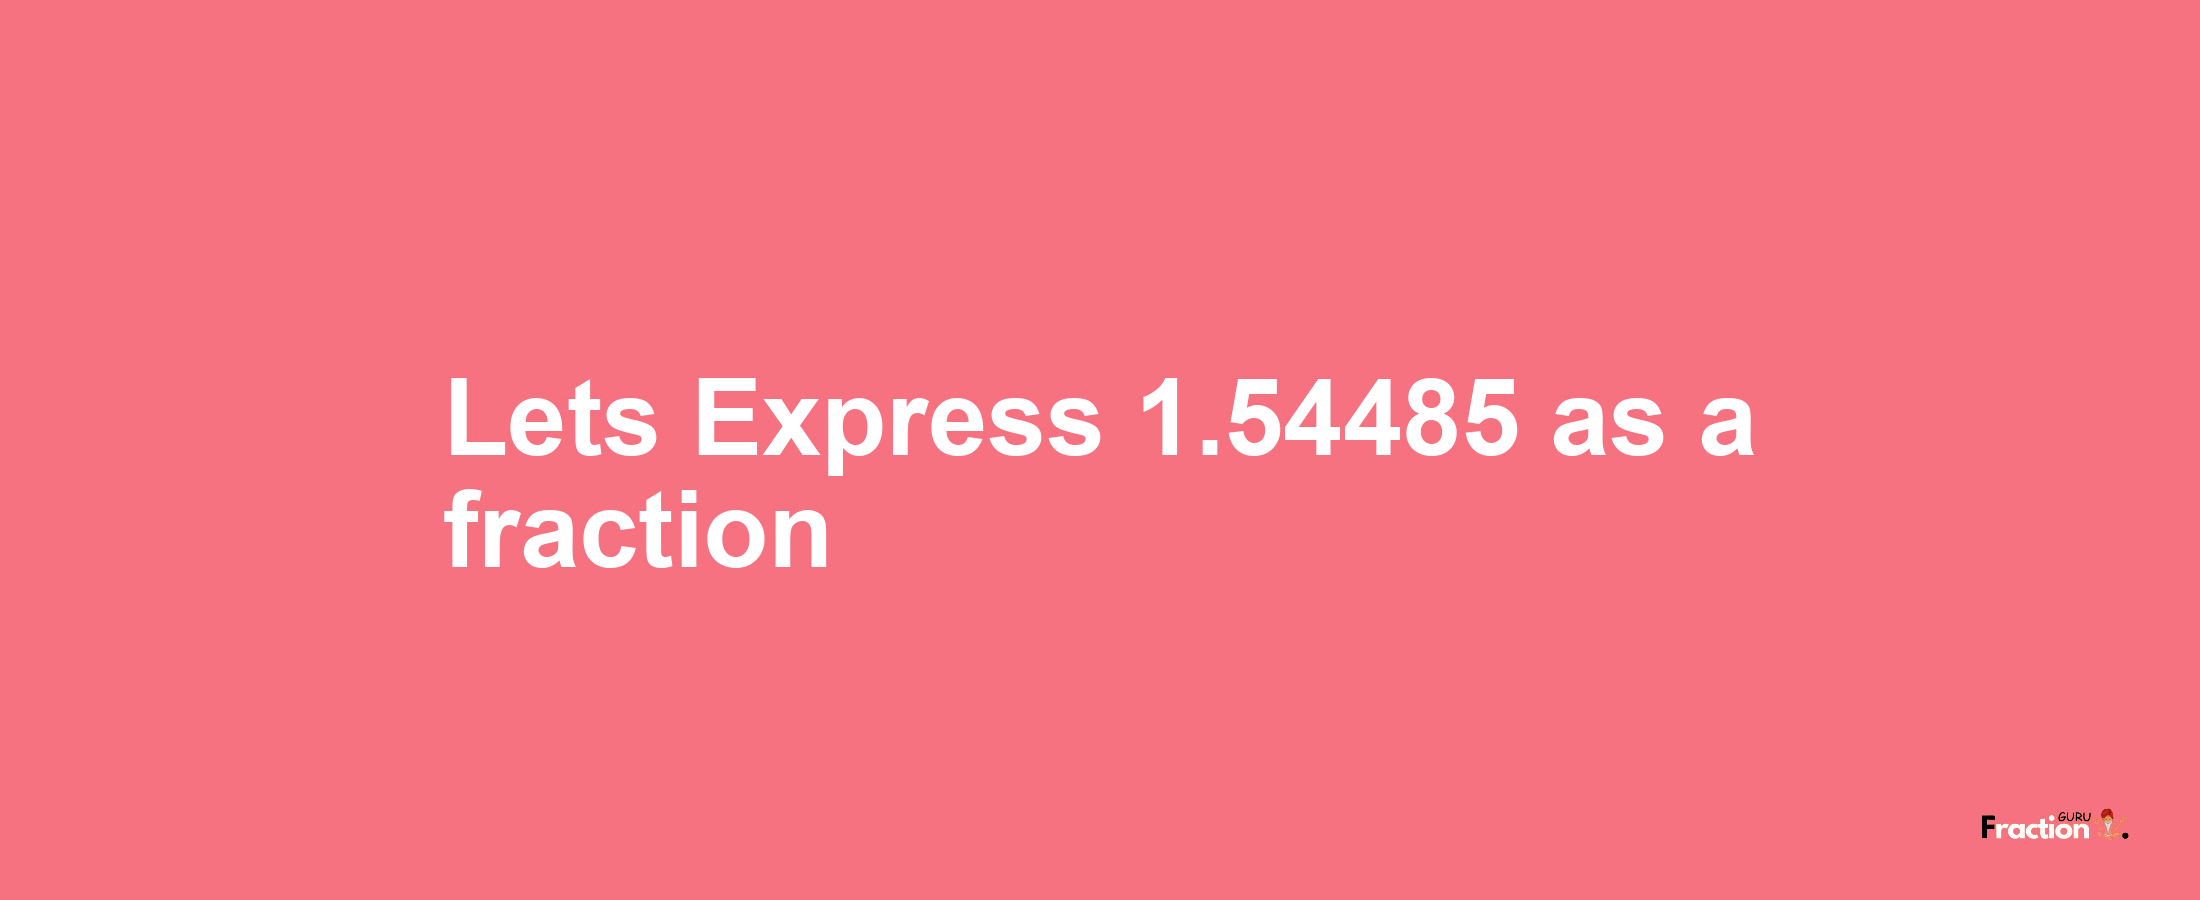 Lets Express 1.54485 as afraction